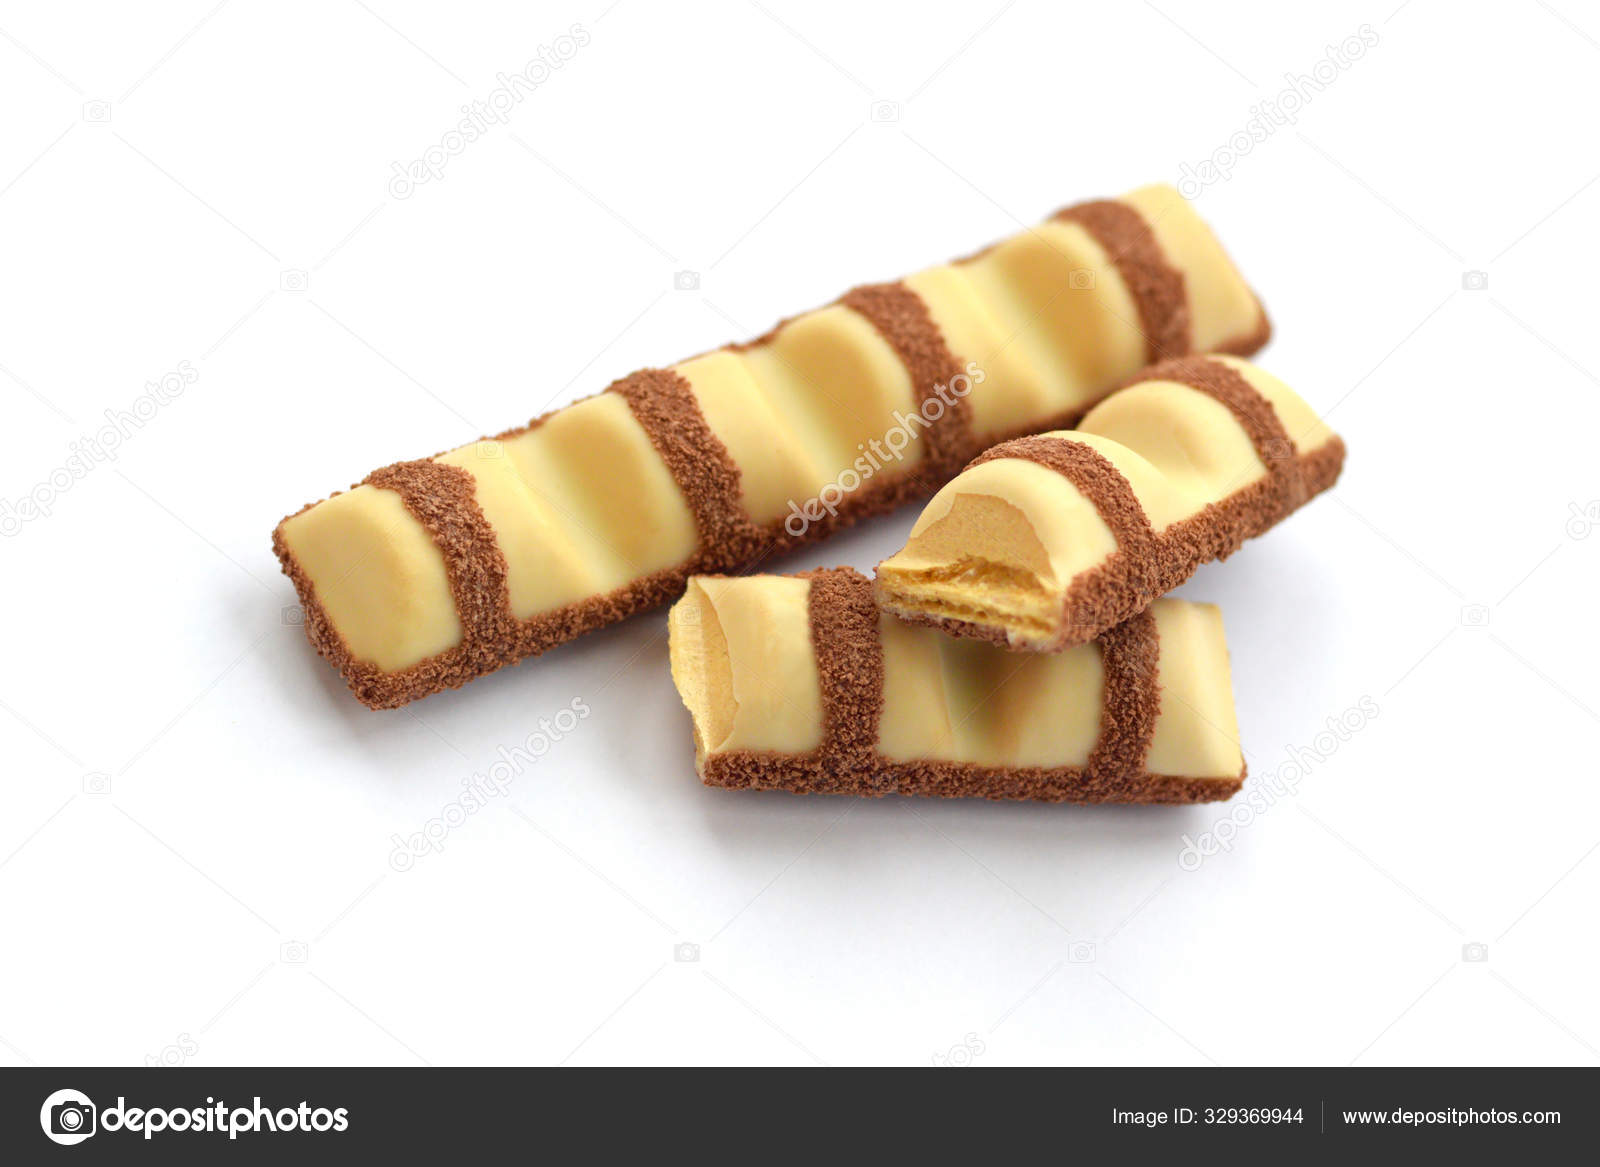 Kinder Bueno Chocolate Candy Bar On – Editorial Confectionery Photo Italian Mehaniq Bueno by © Kinder Stock Background. Ferrero White Manufacturer #329369944